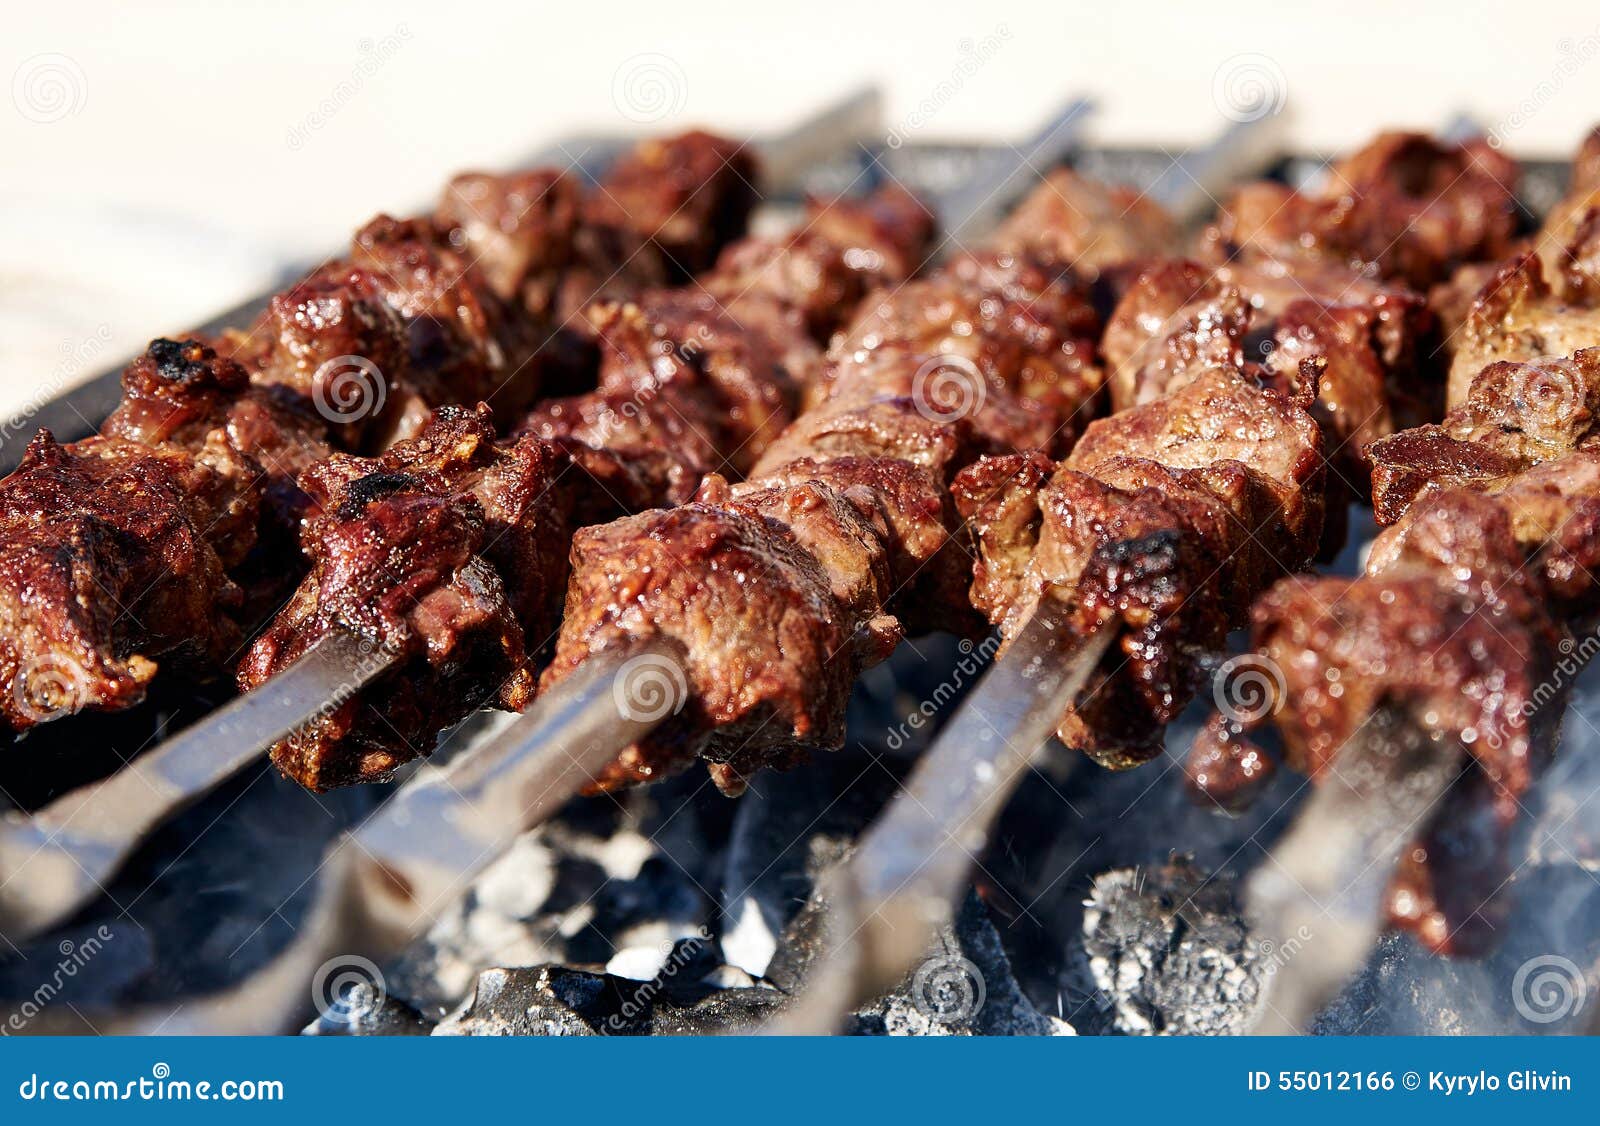 Barbecue skewers with meat stock photo. Image of meal - 55012166